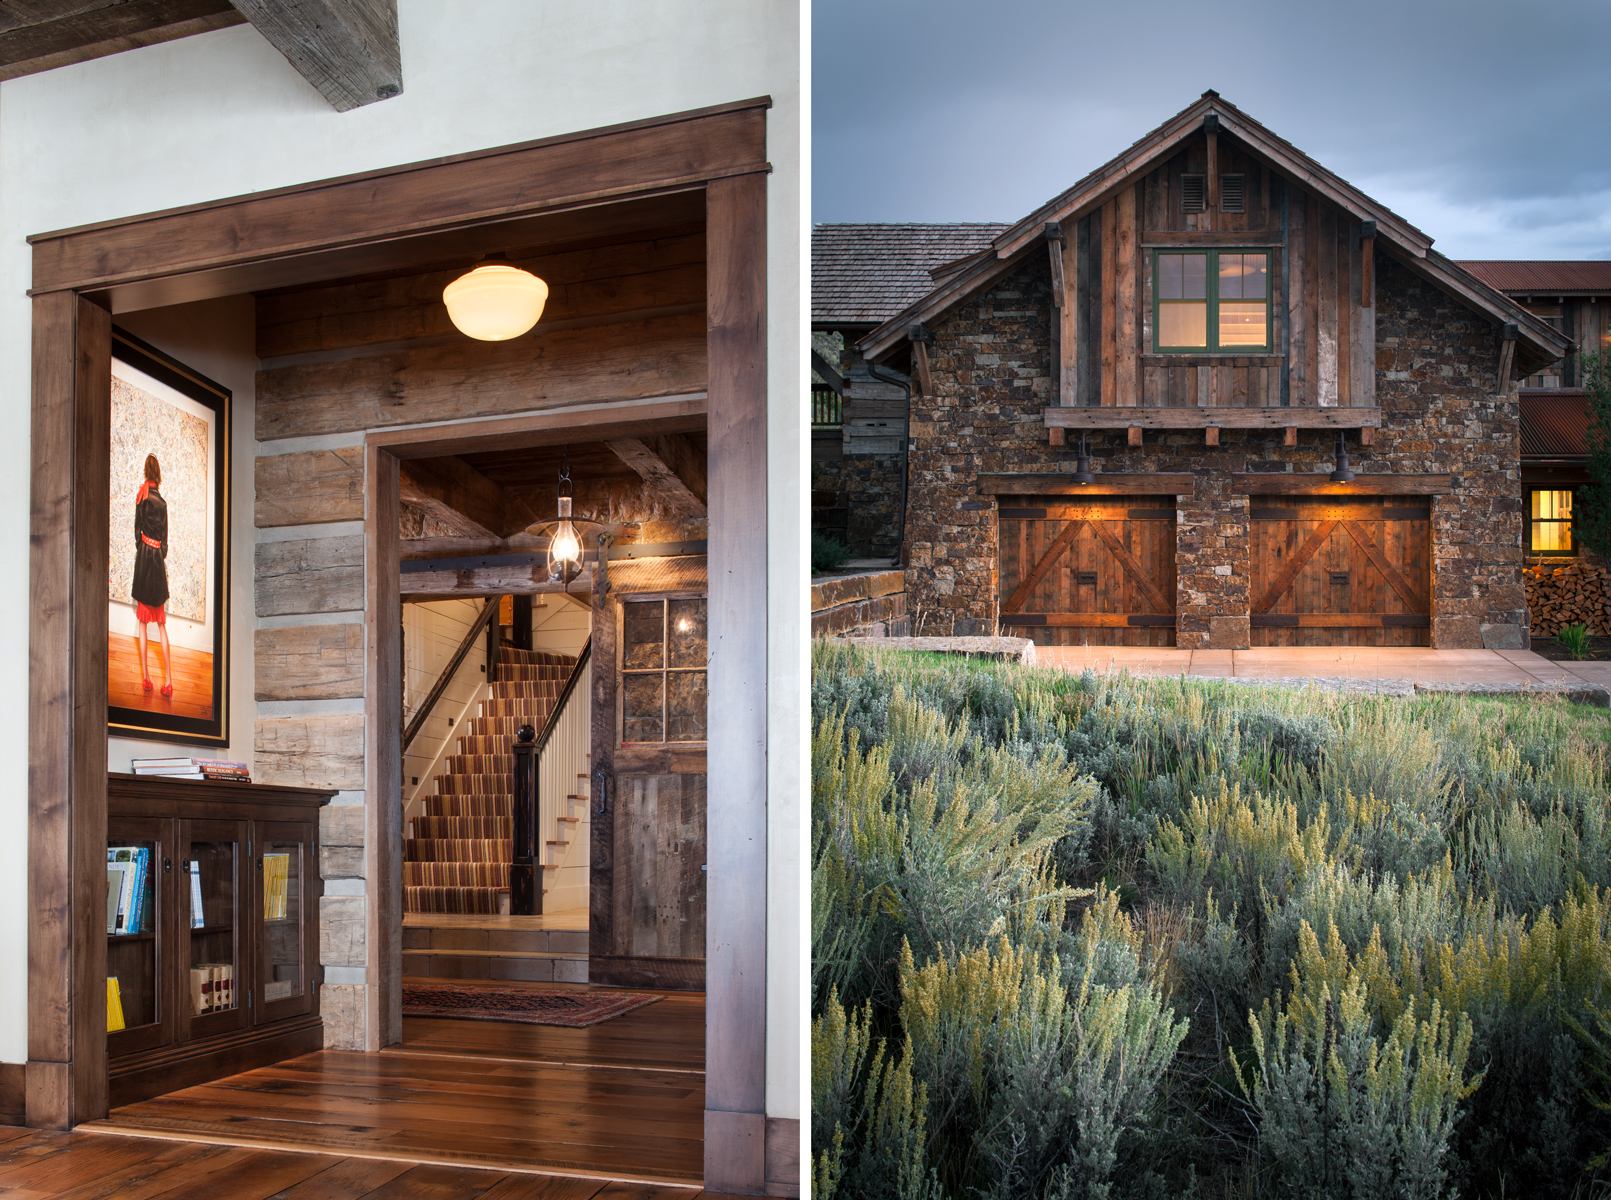 Two views of a Private Residence near Park City, UT. for Line 8 Design. One view is of the interior foyer looking up the stairs through the sliding barn wood door and the other is a sectional of the exterior at twilight with sage brush in the foreground and a warm glow of light being cast on the garage doors and illuminating from the upstairs windows.